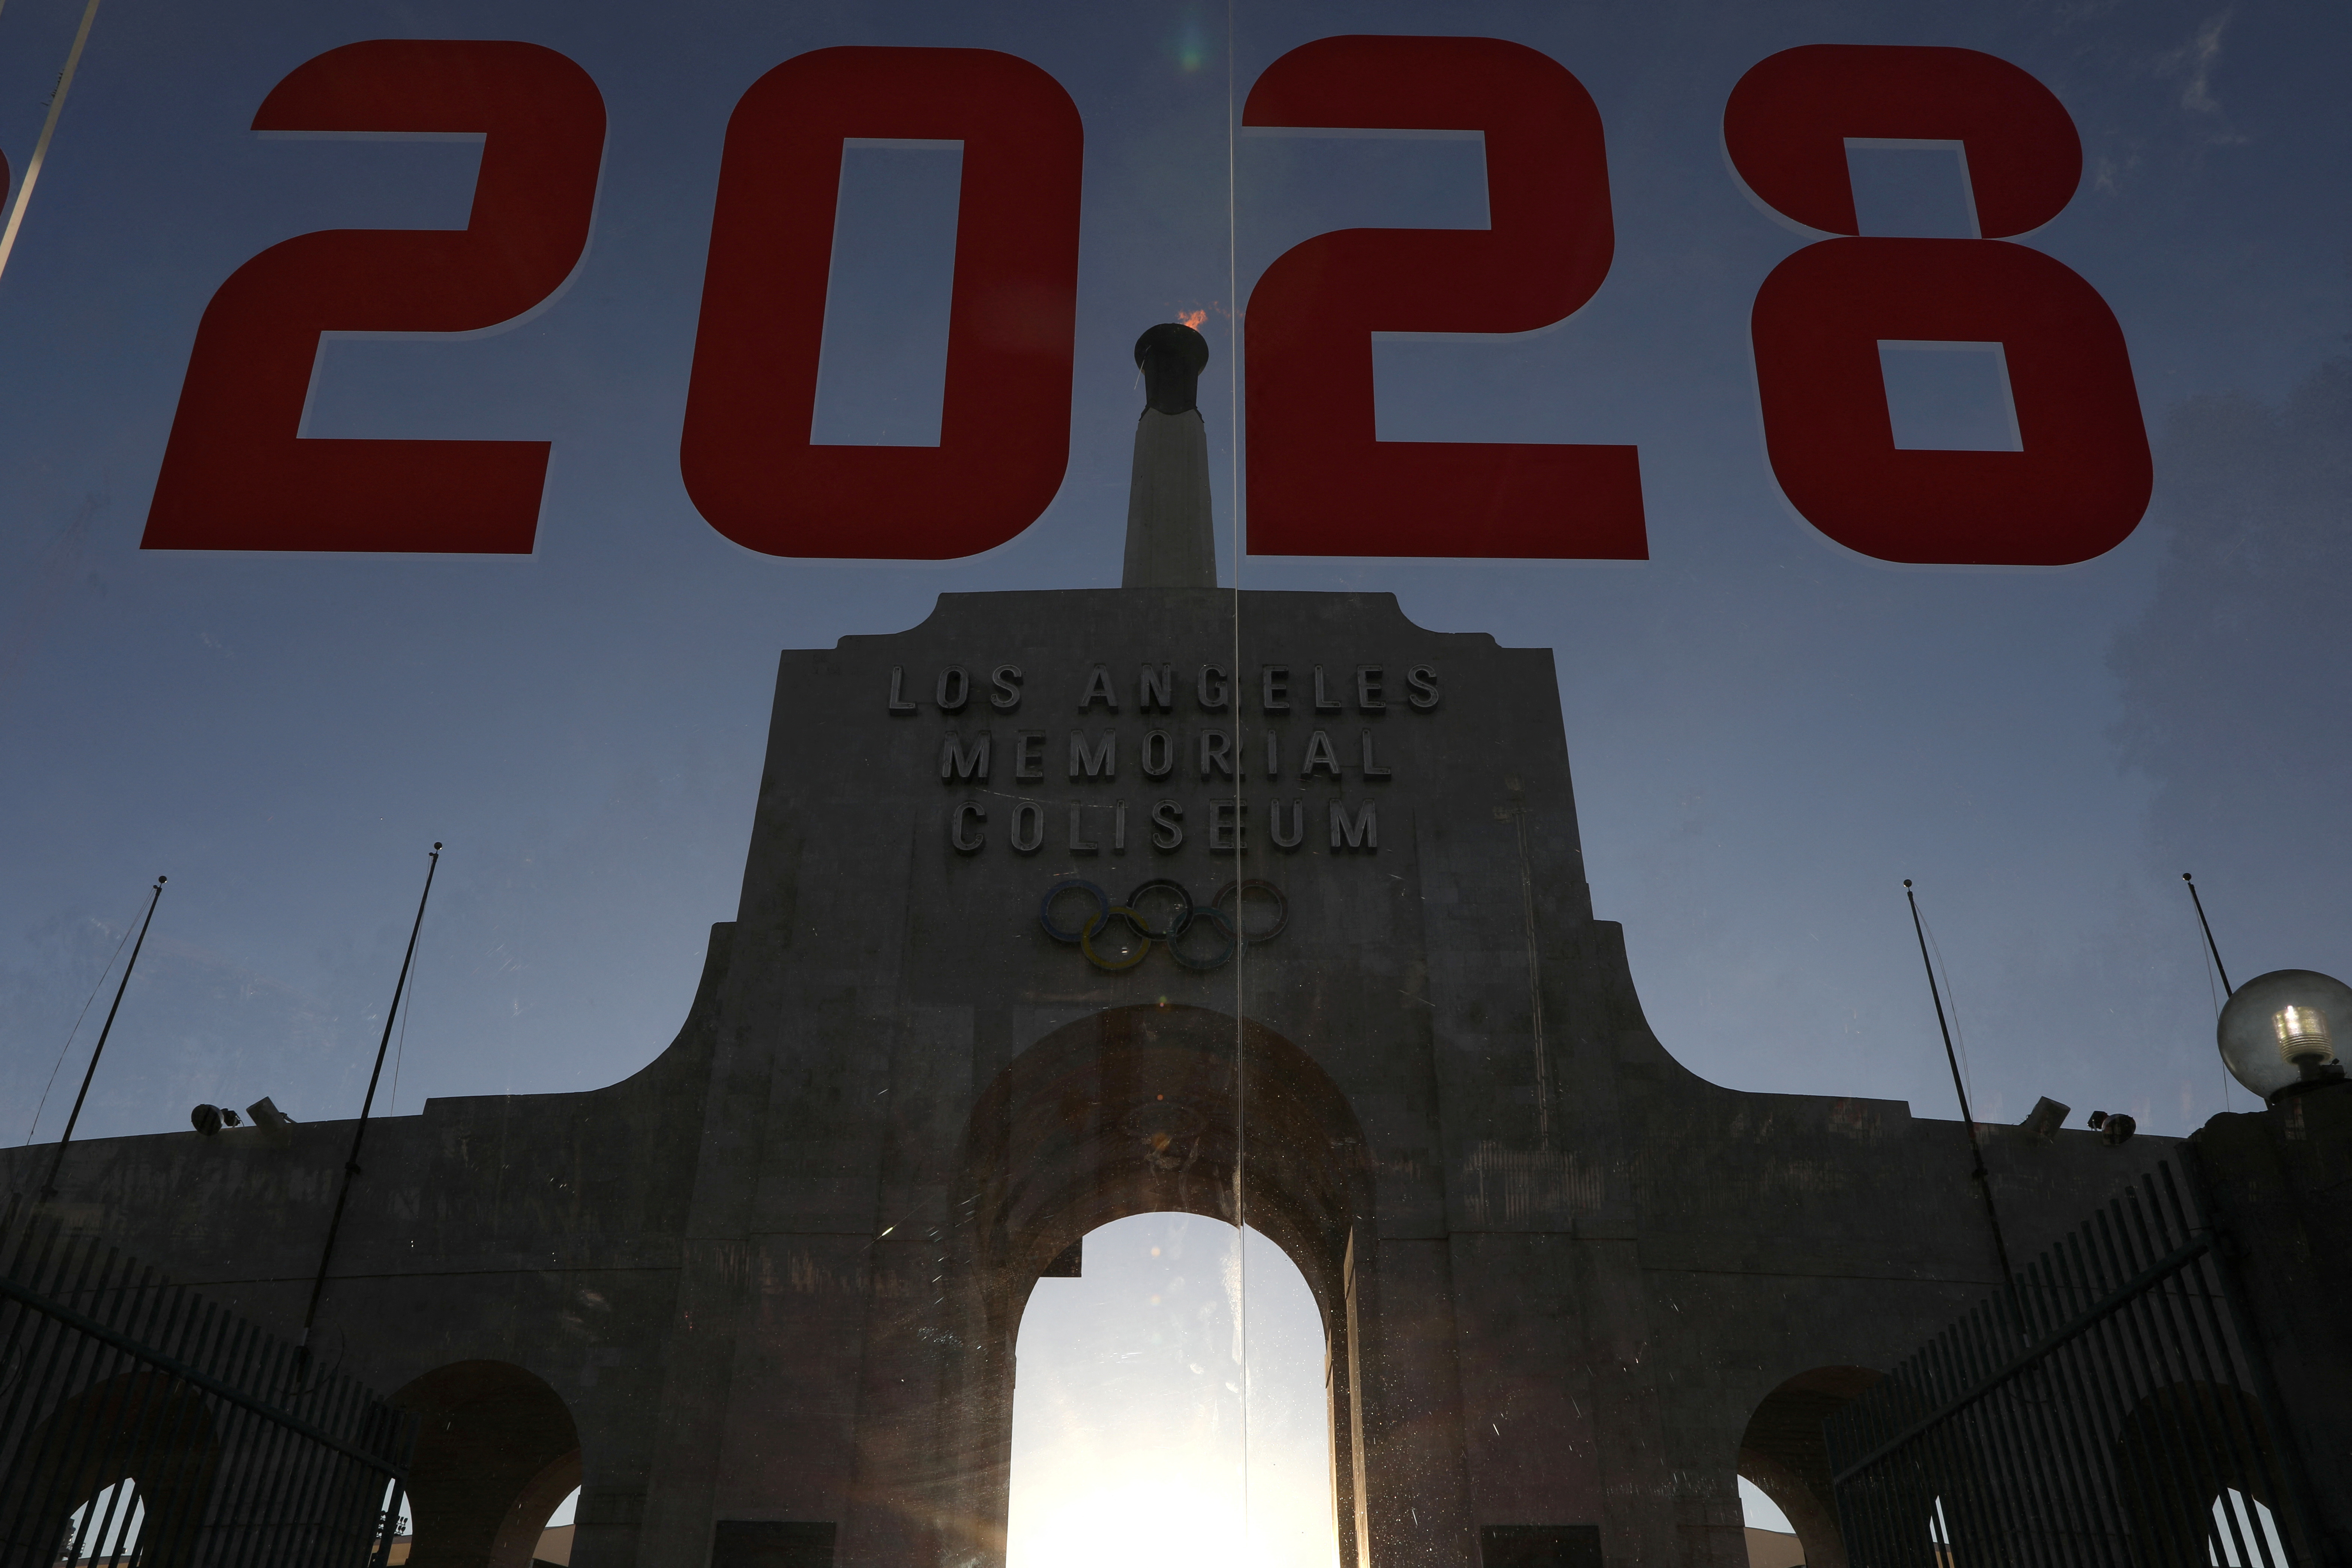 FILE PHOTO: An LA2028 sign is seen at the Los Angeles Coliseum to celebrate Los Angeles being awarded the 2028 Olympic Games, in Los Angeles, California, U.S., September 13, 2017. REUTERS/Lucy Nicholson/File Photo